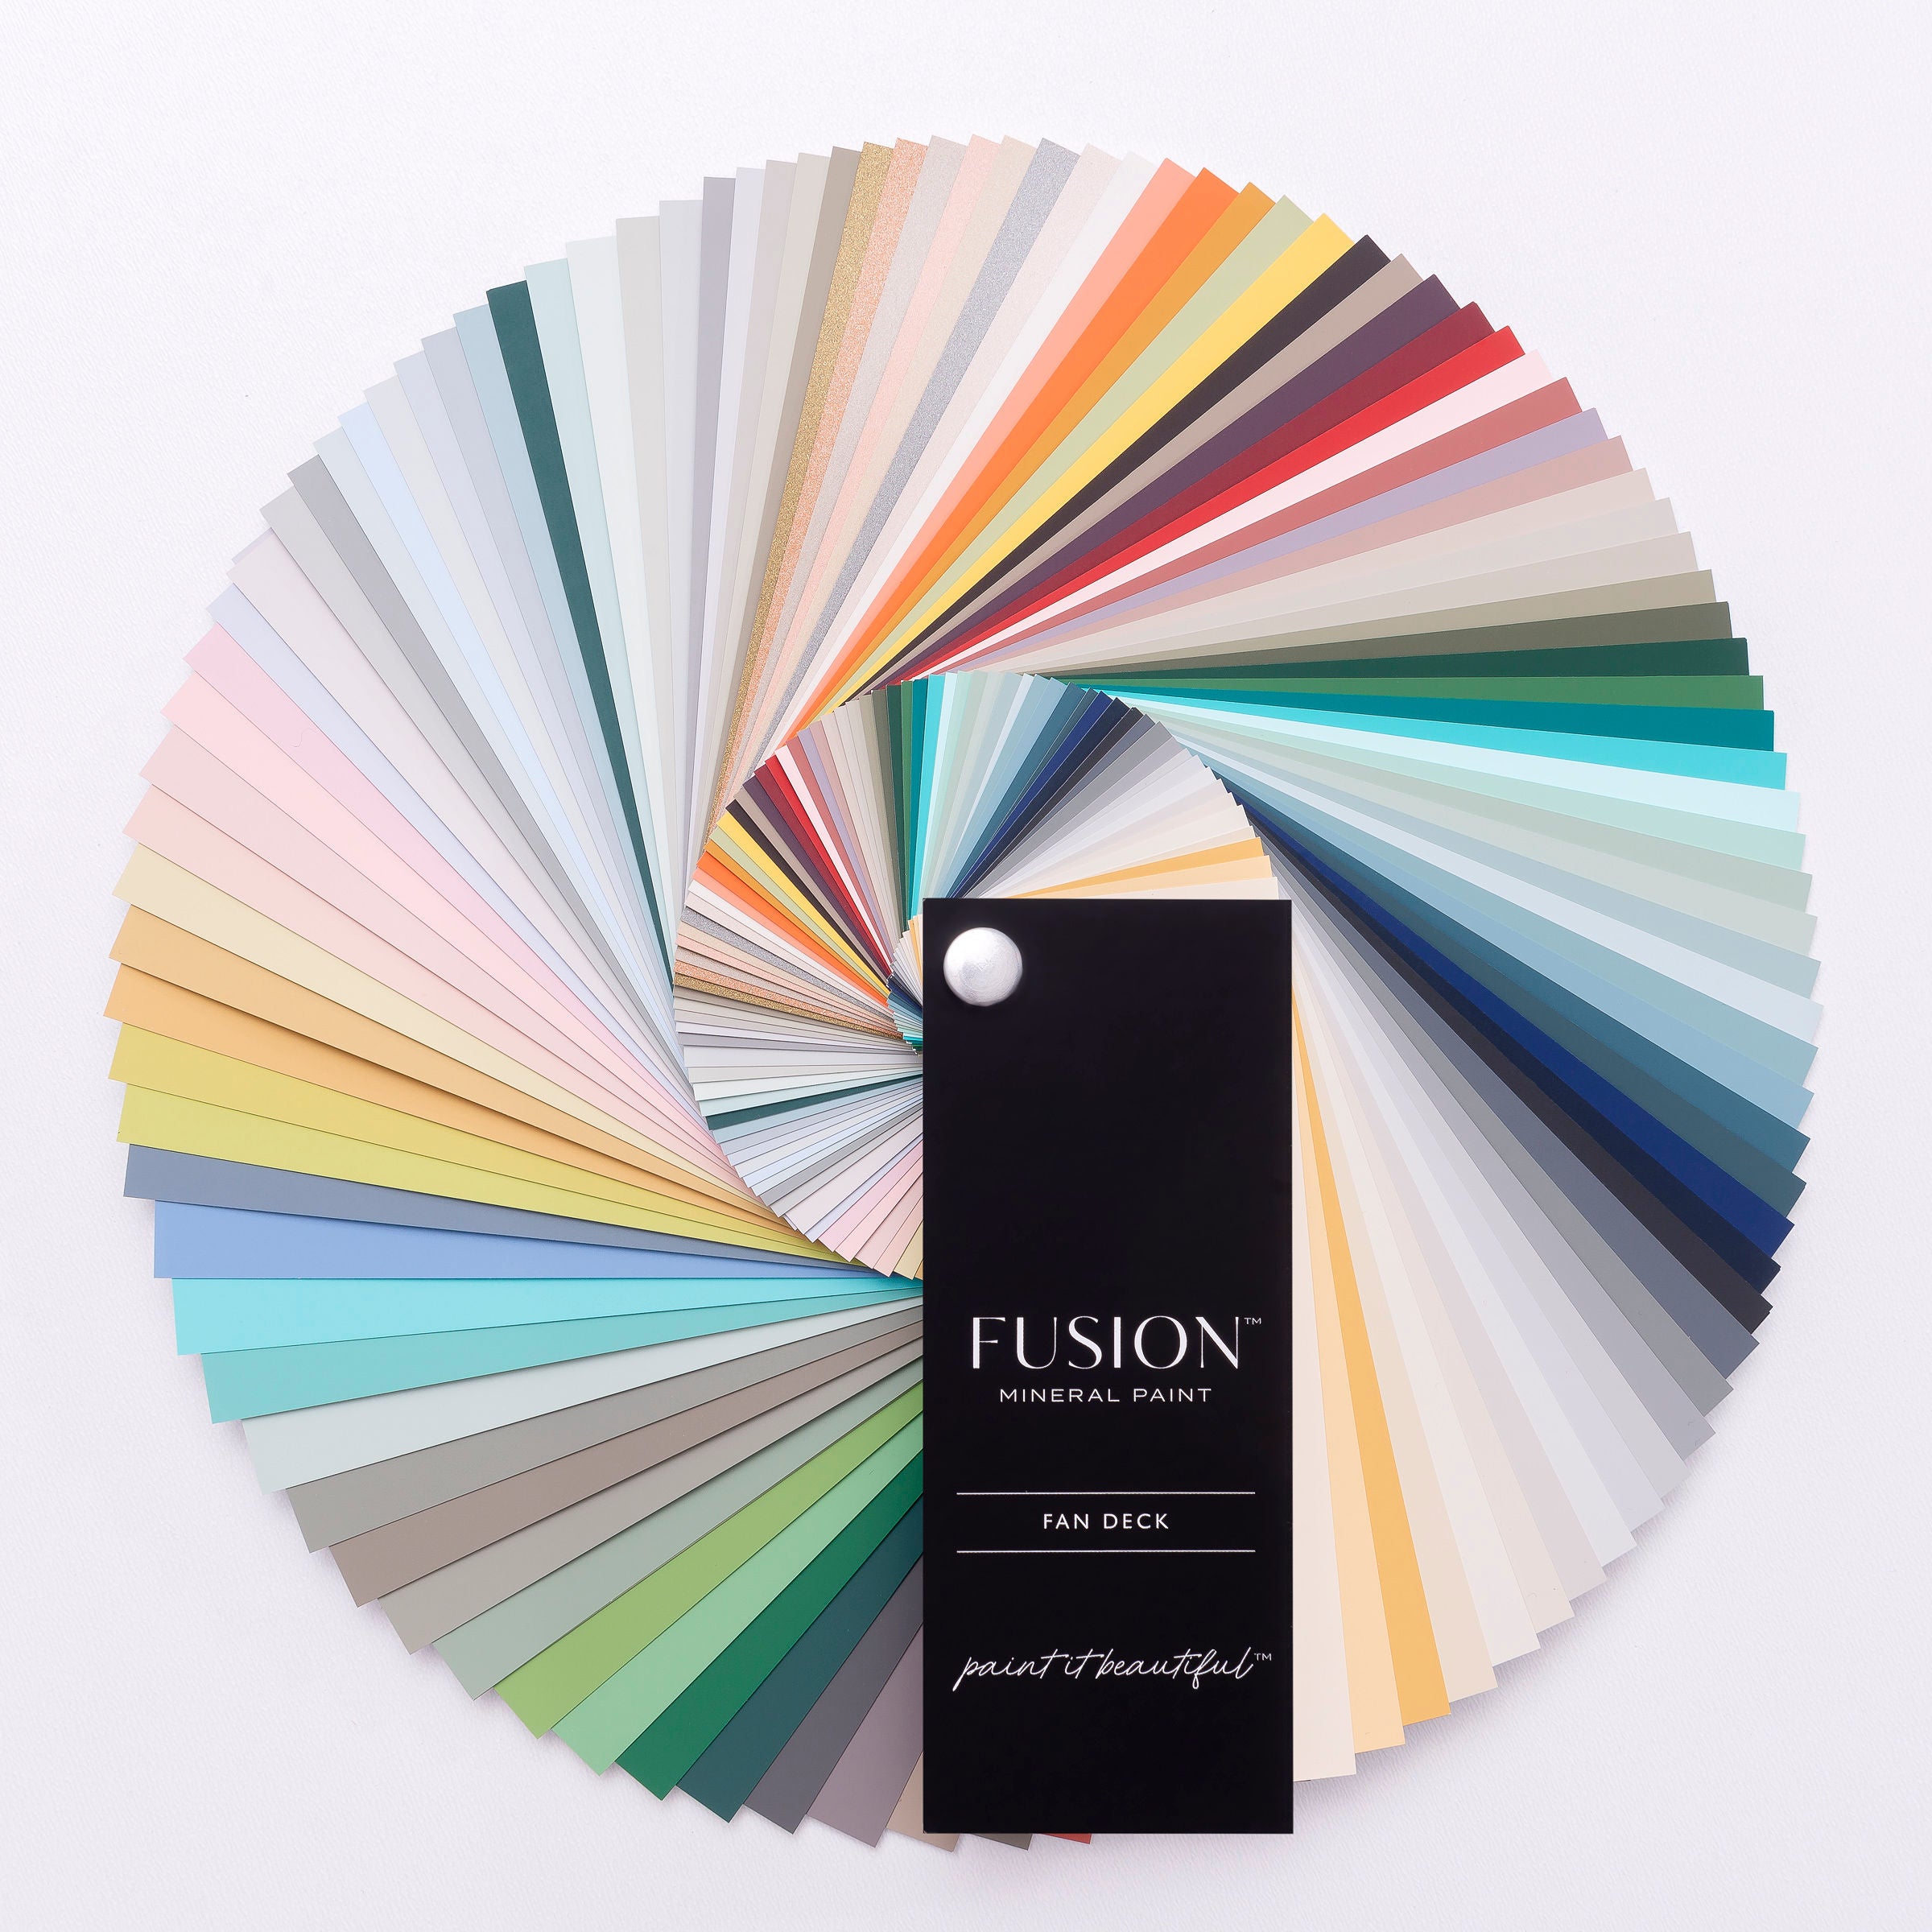 Fusion Mineral Paint in Wellington